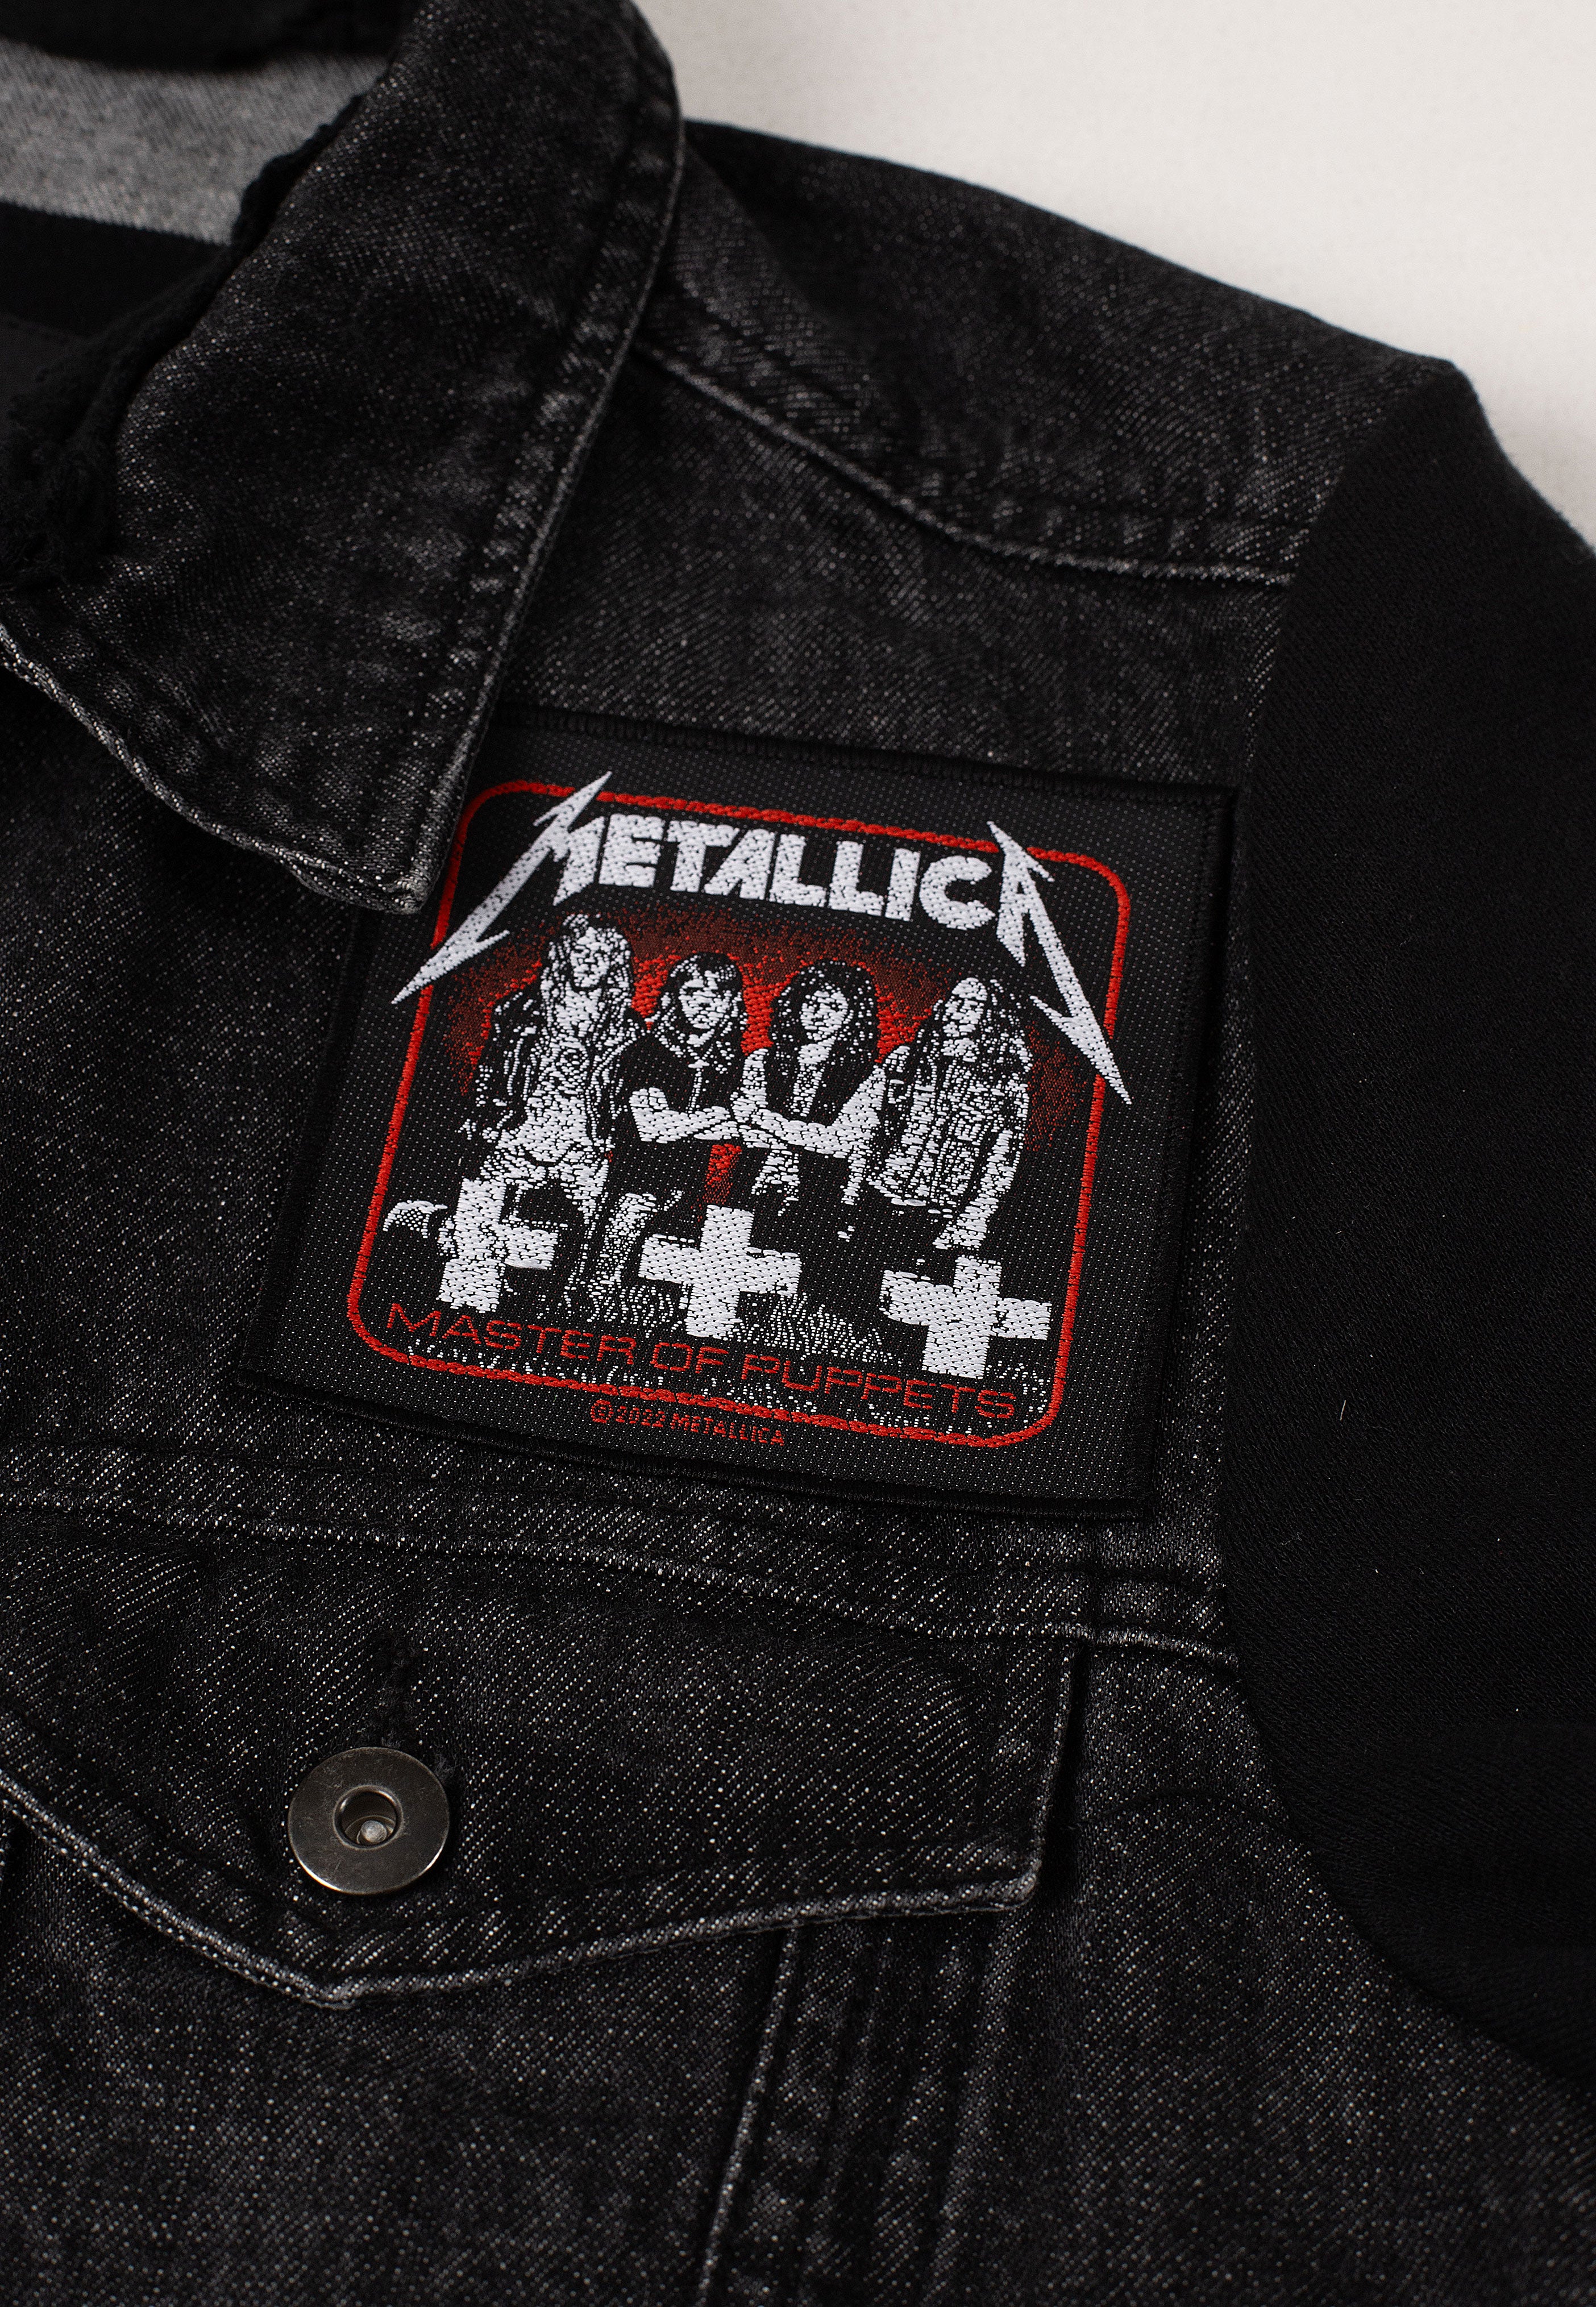 Metallica - Master Of Puppets Band - Patch